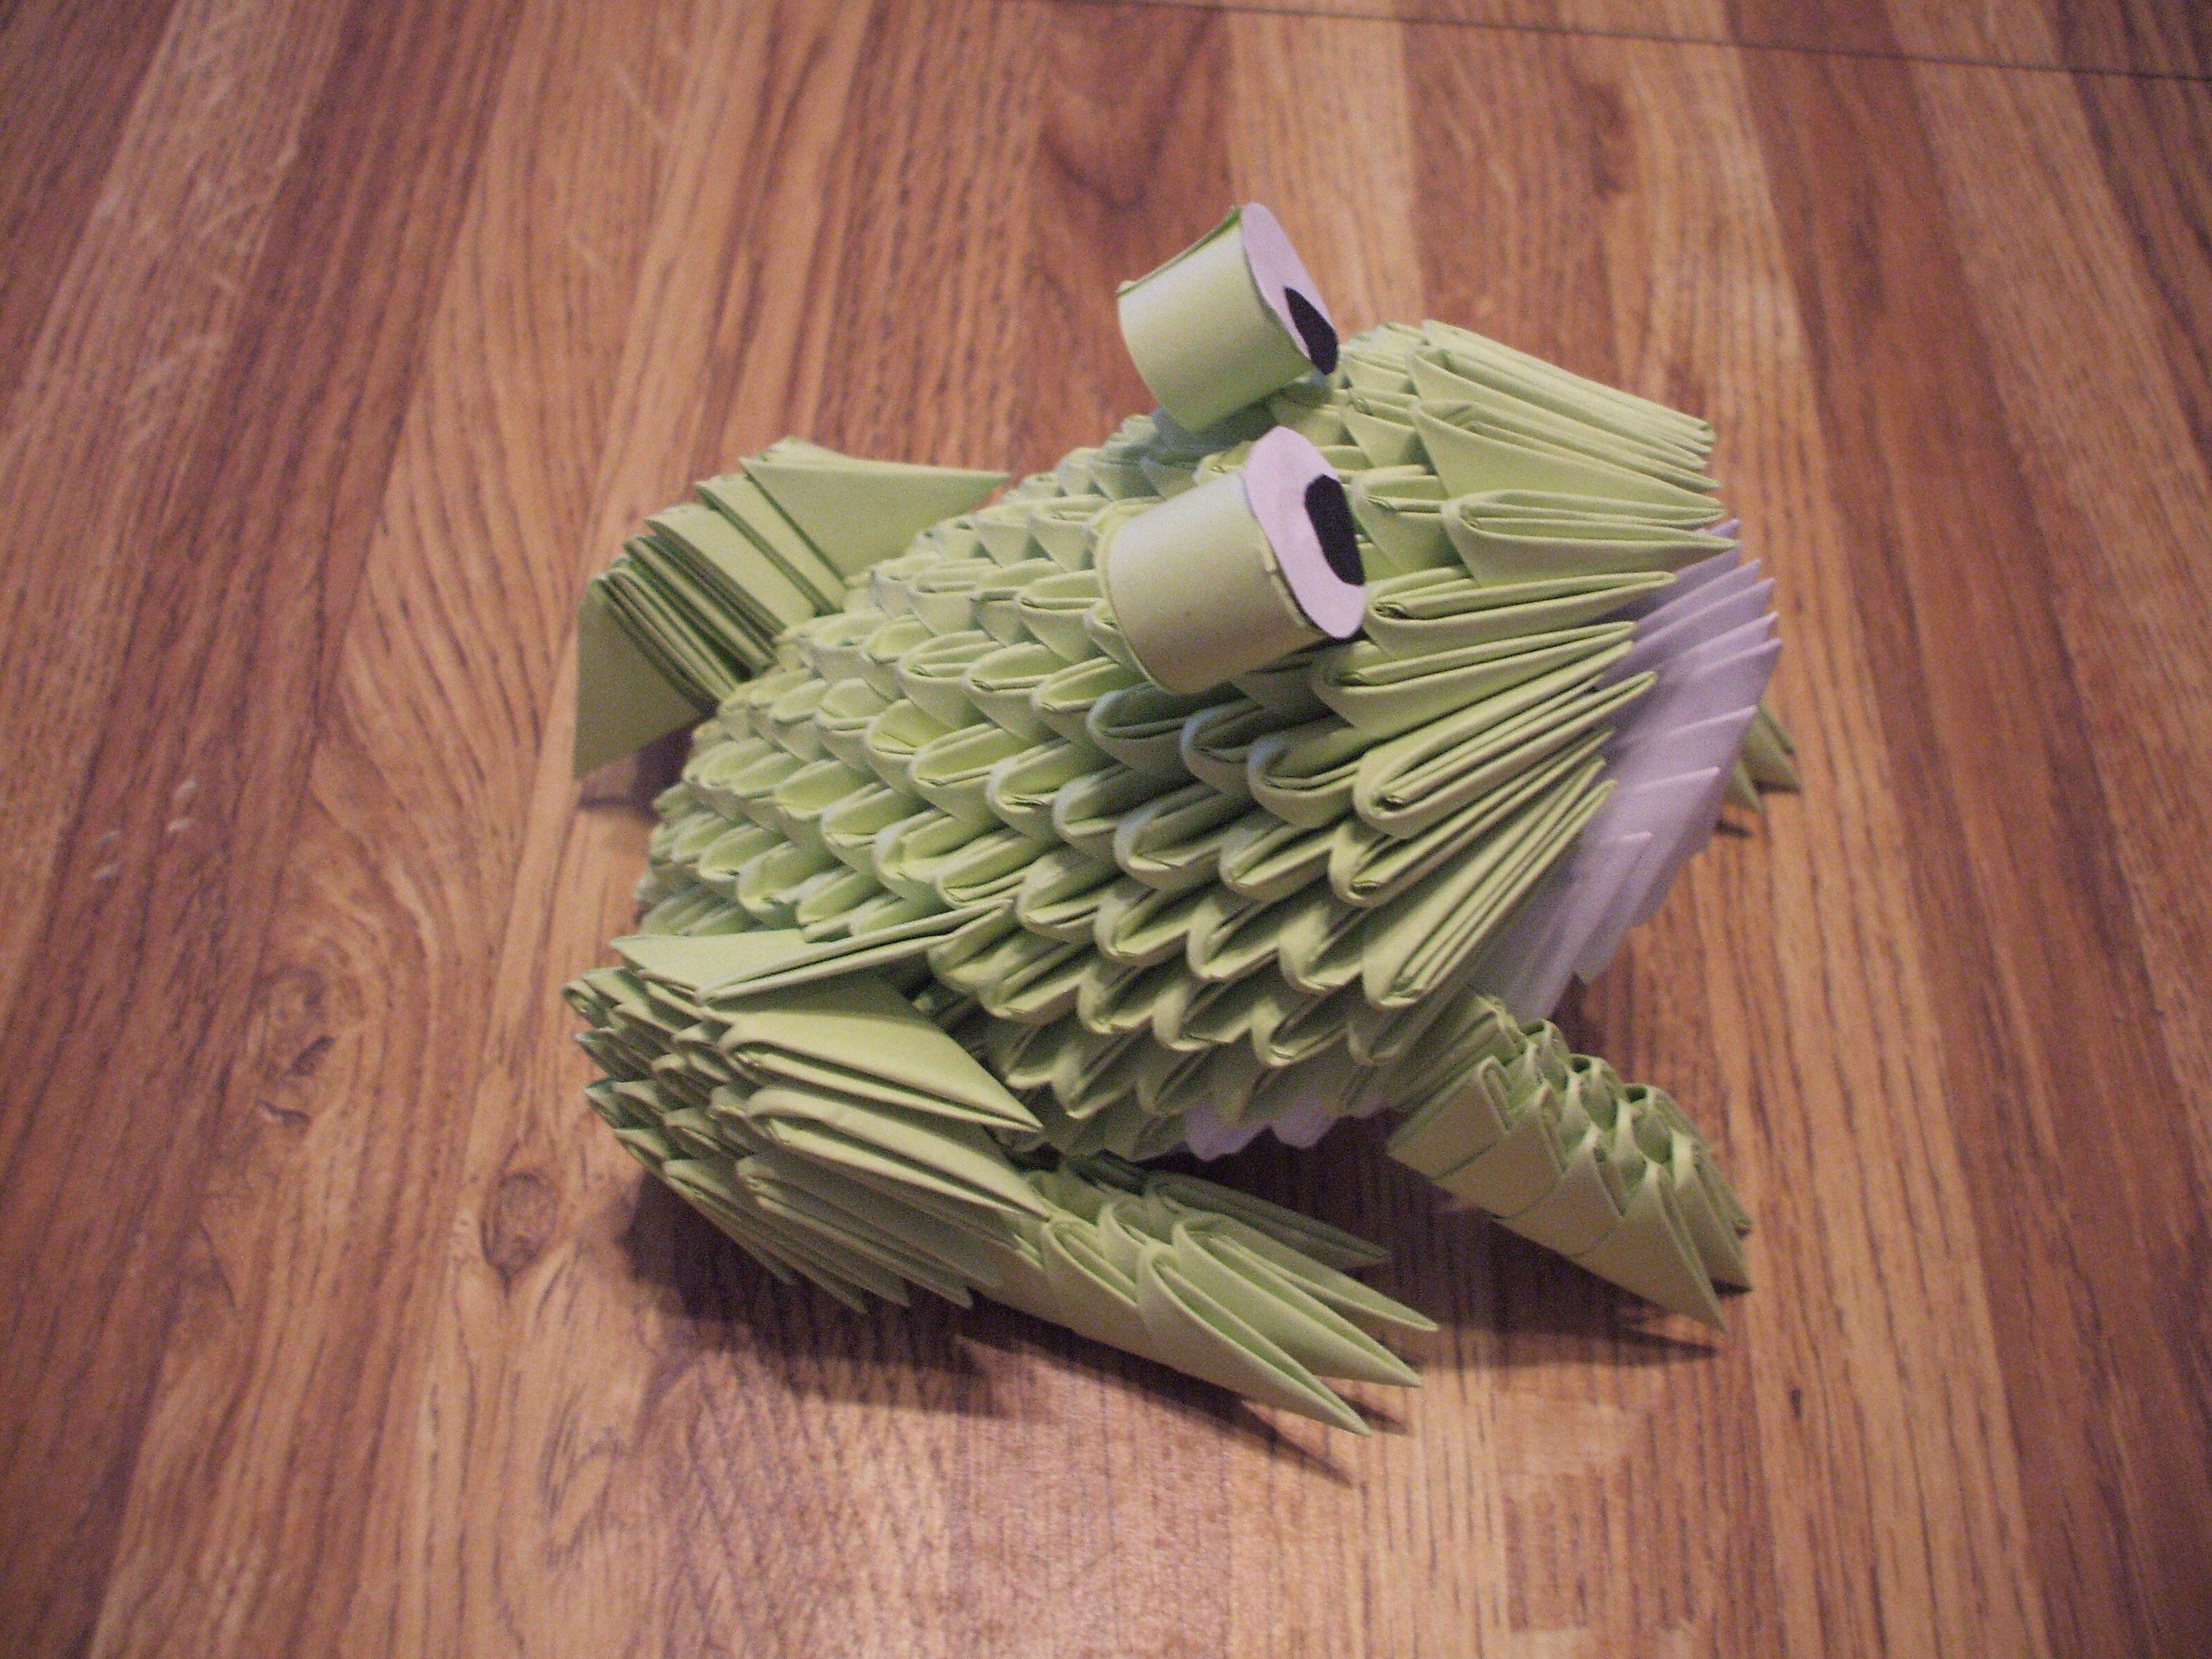 Papercraft Frog 3d origami Frog Made by My Daughter Pinterest